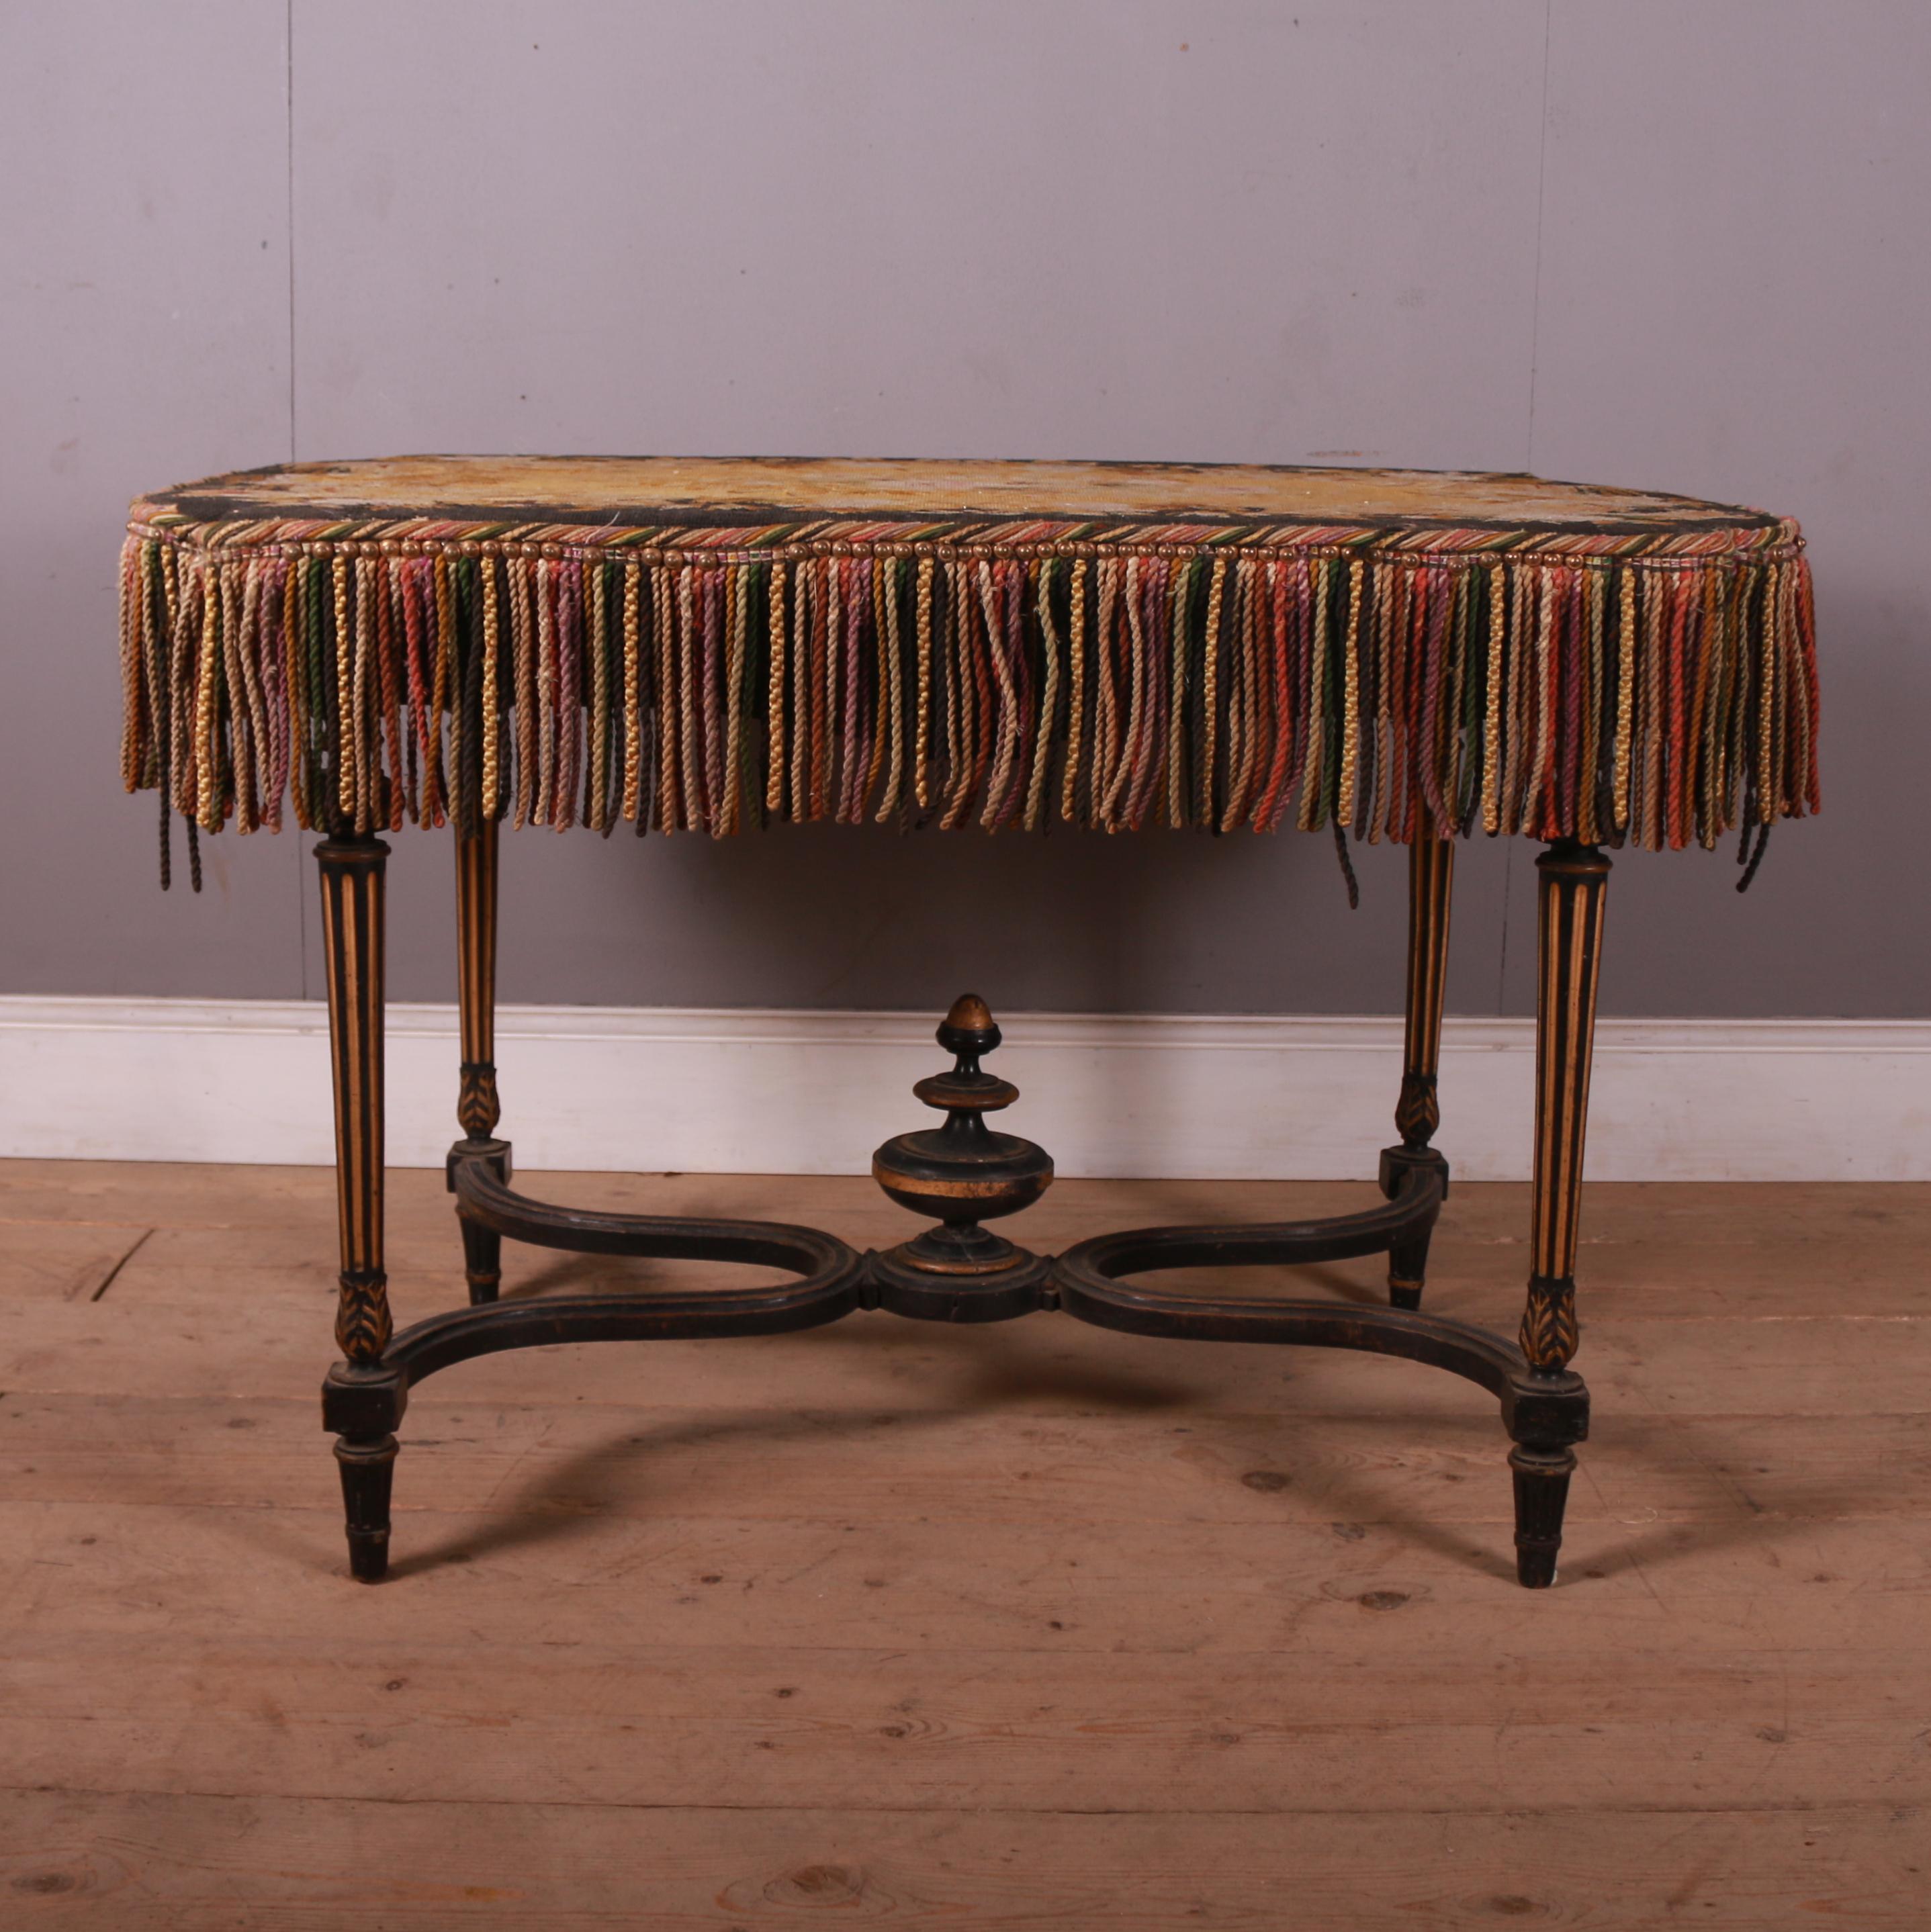 Late 19th C French ebonised and gilt centre table / lamp table. 1890.

Dimensions
47 inches (119 cms) Wide
27.5 inches (70 cms) Deep
29.5 inches (75 cms) High.

 